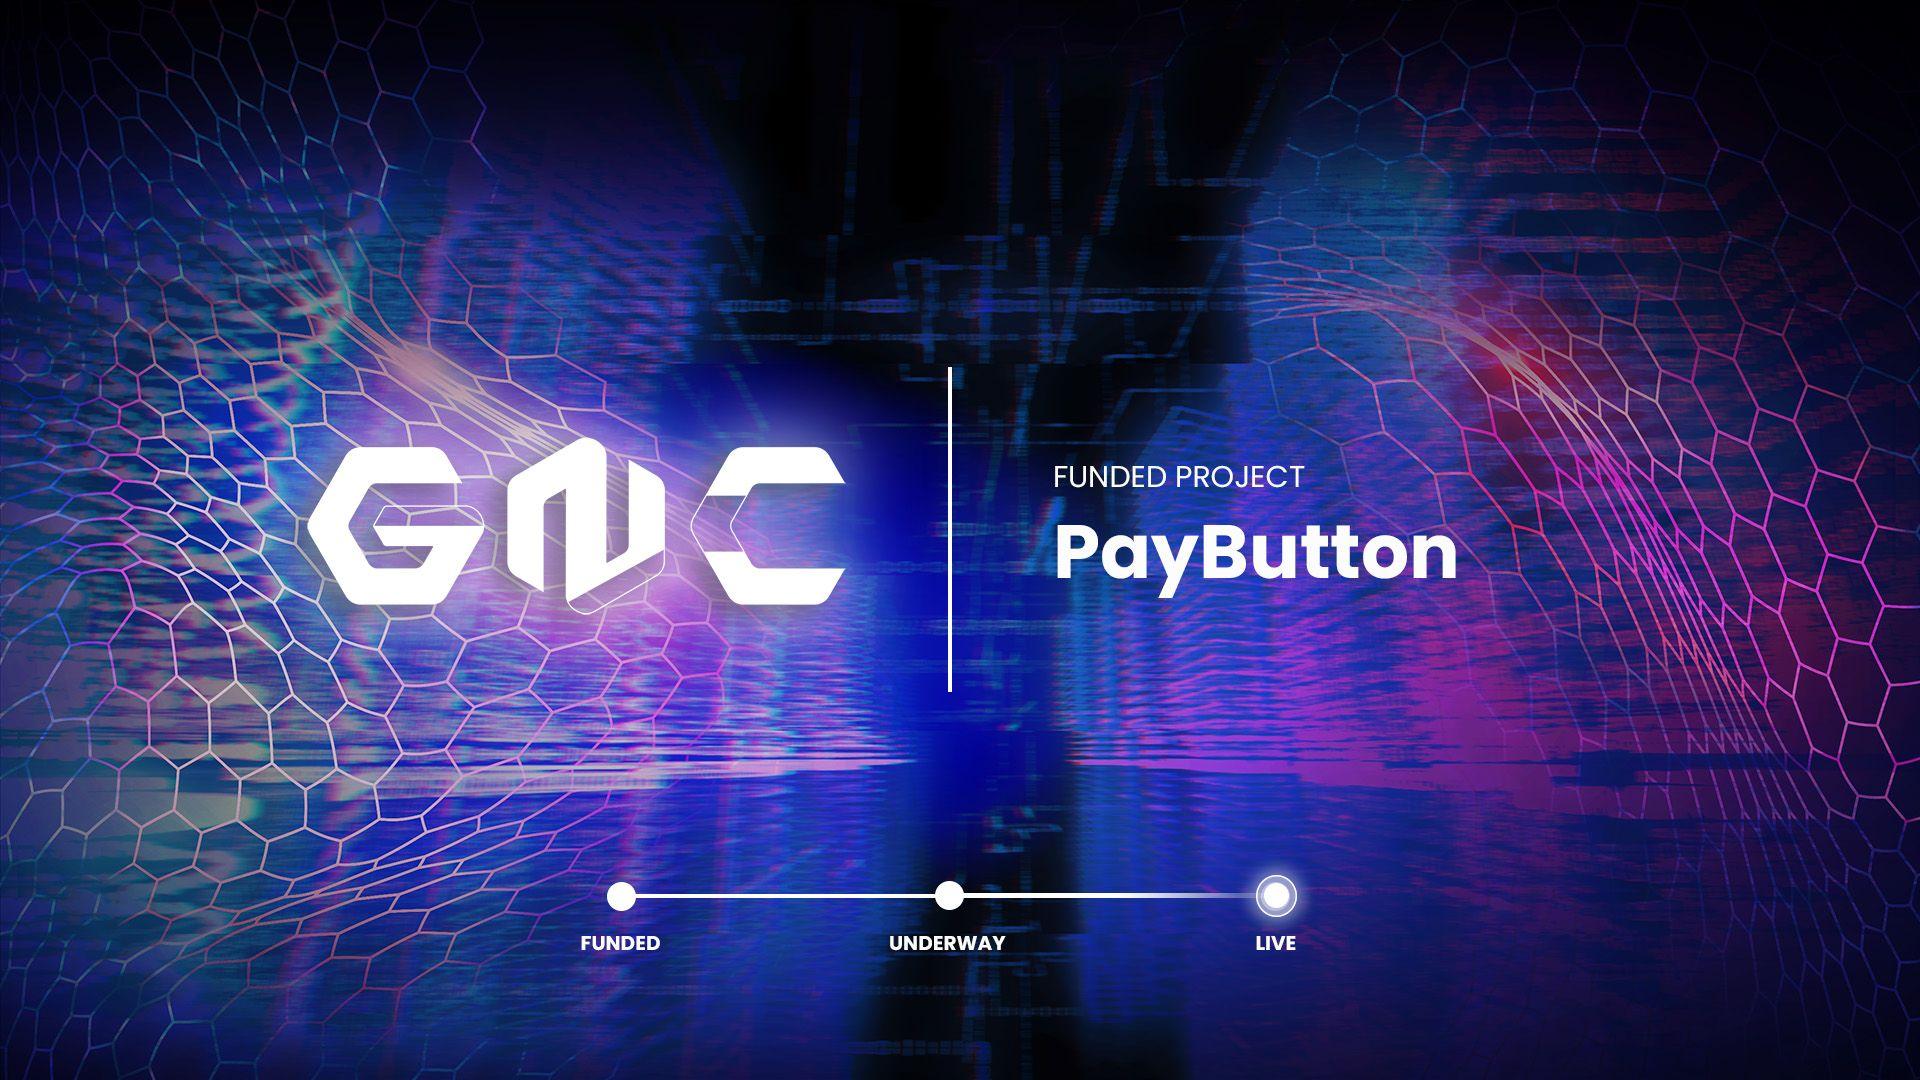 PayButton is Here: Making eCash Payments Simple and Easy